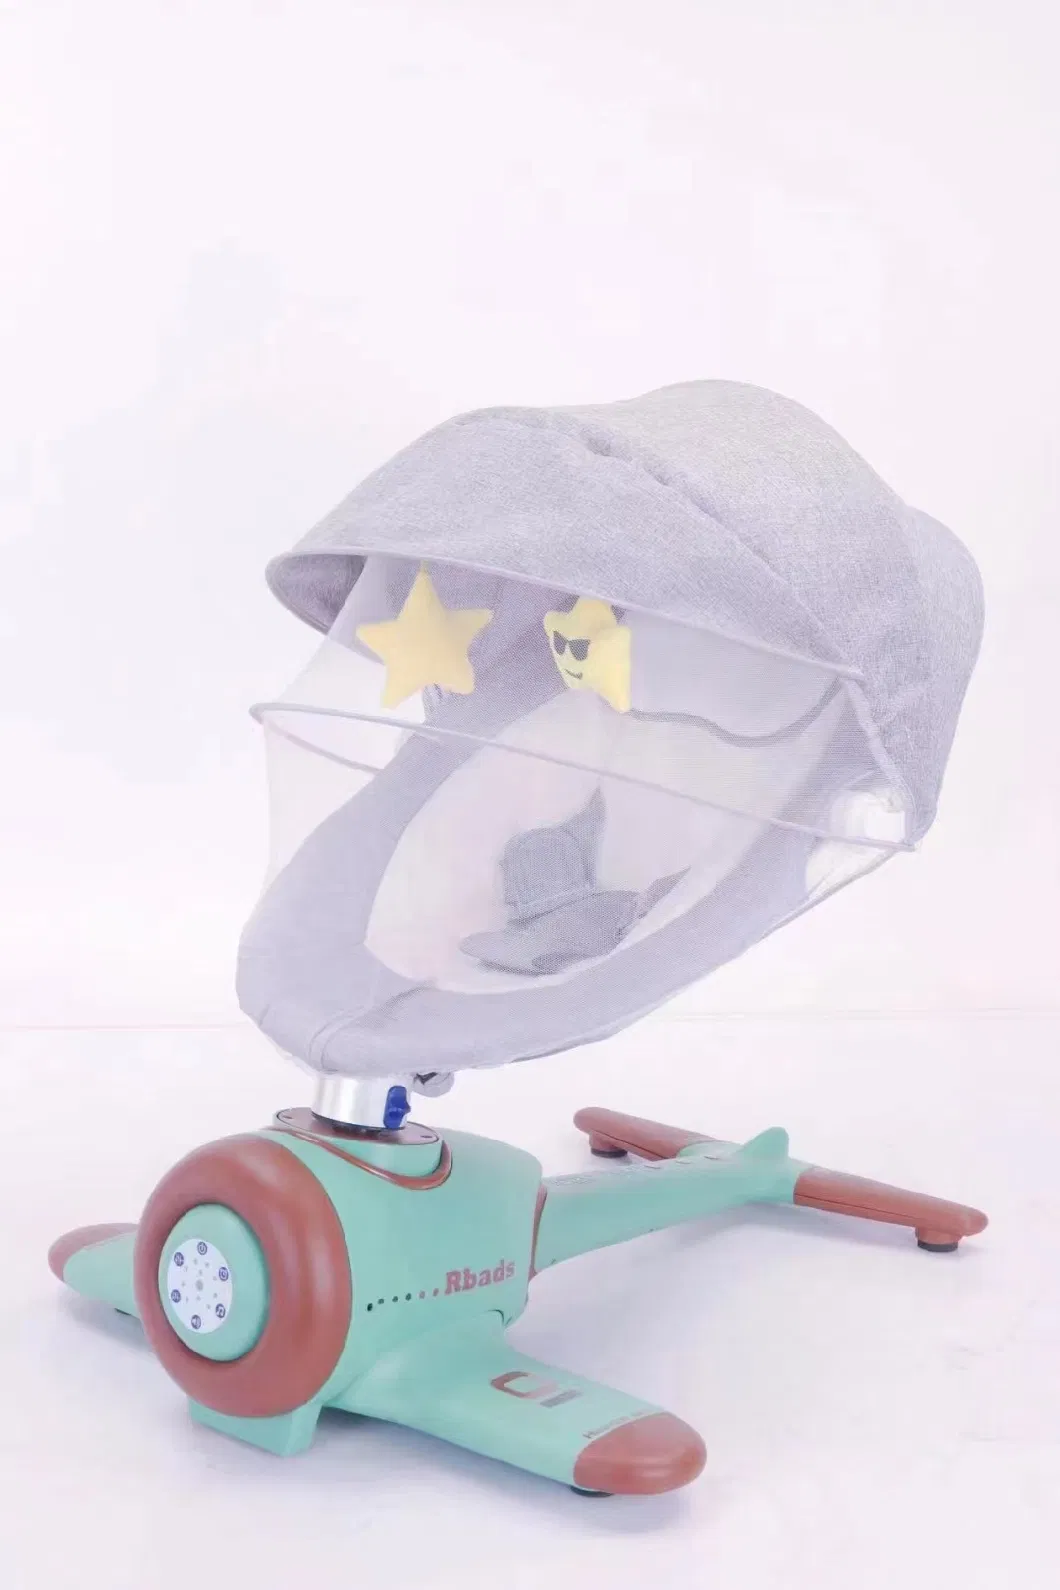 2023 3 in 1 Electric Portable Modern Indoor Baby Sleeping Chair Toys Automatic Baby Eggshell Rocker Bouncer Swing Cradle Chair with Music